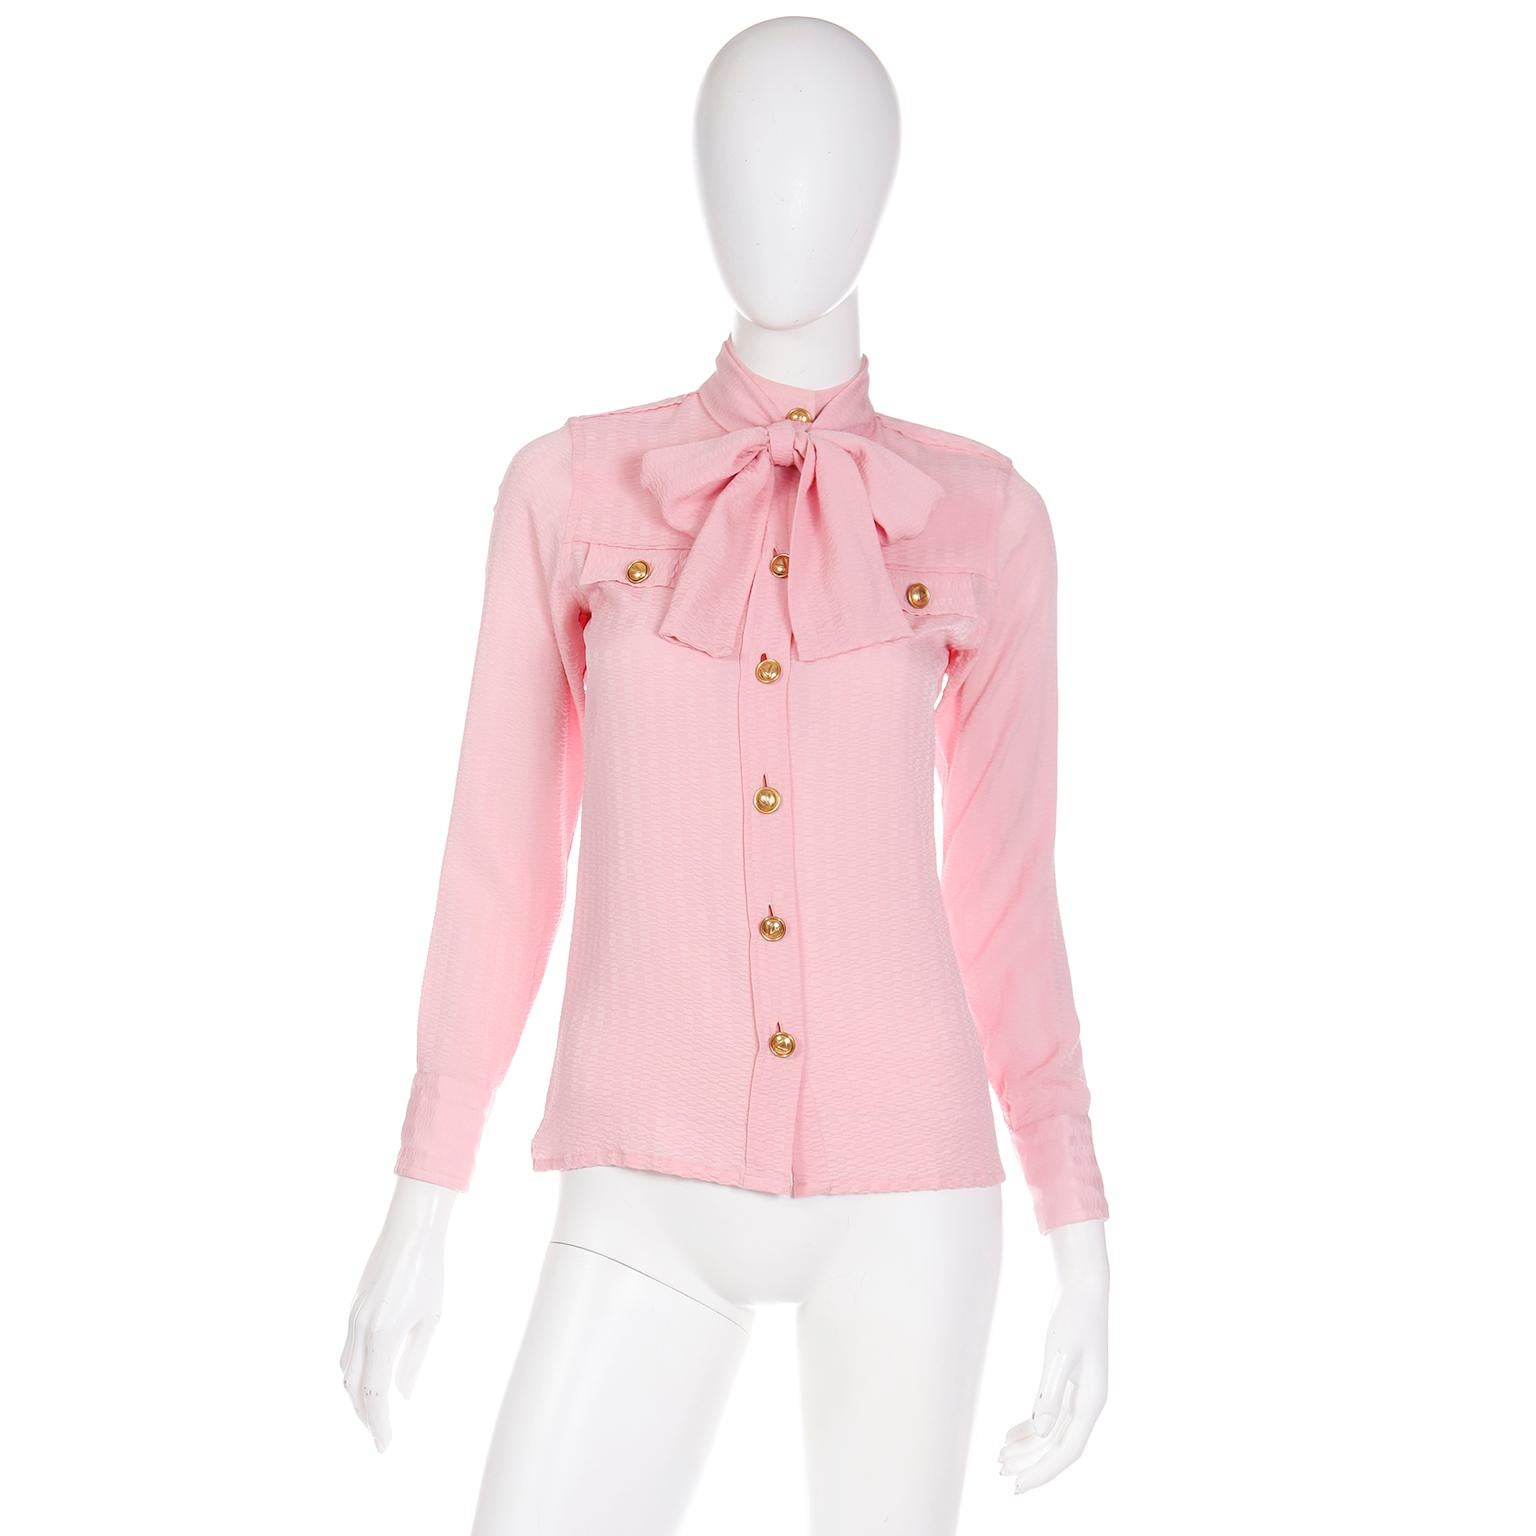 This is an exceptional tonal patterned pink silk vintage blouse from Boutique Valentino. This rare 1970's Valentino pussy bow blouse is truly a a garment that will elevate anything you pair with it. You can wear this top with the pretty sash tied in